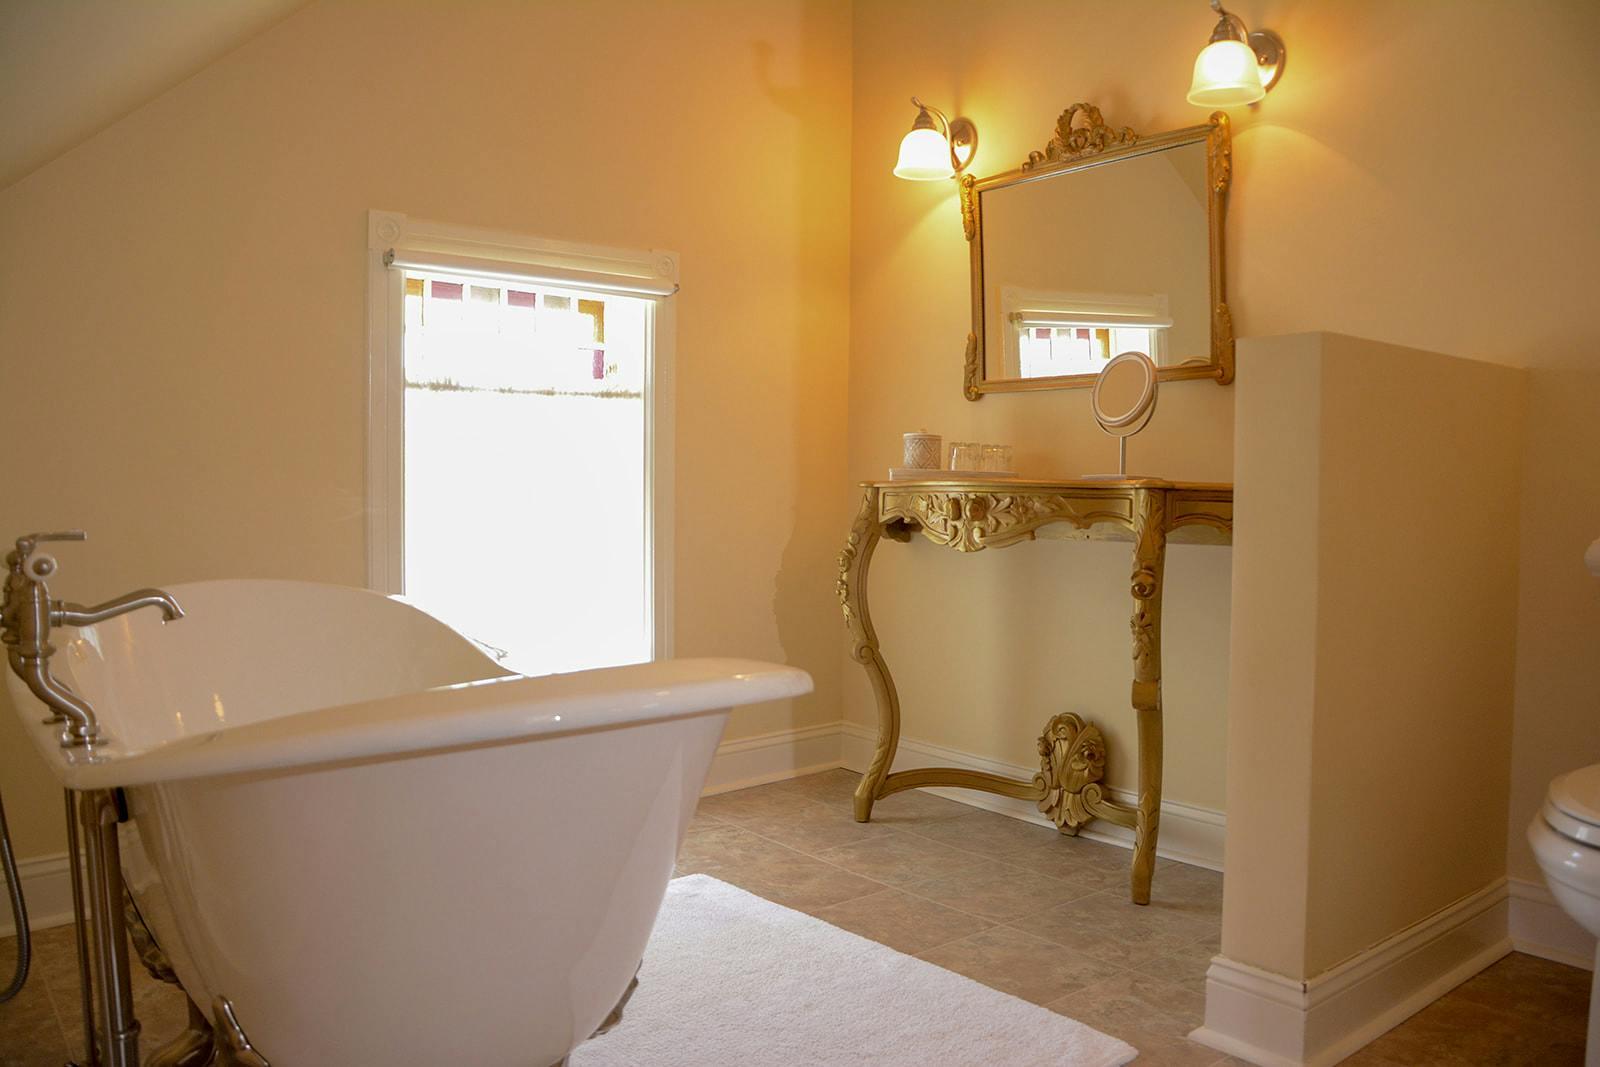 Slipper tub in the bathroom of the Rapunzel suite.